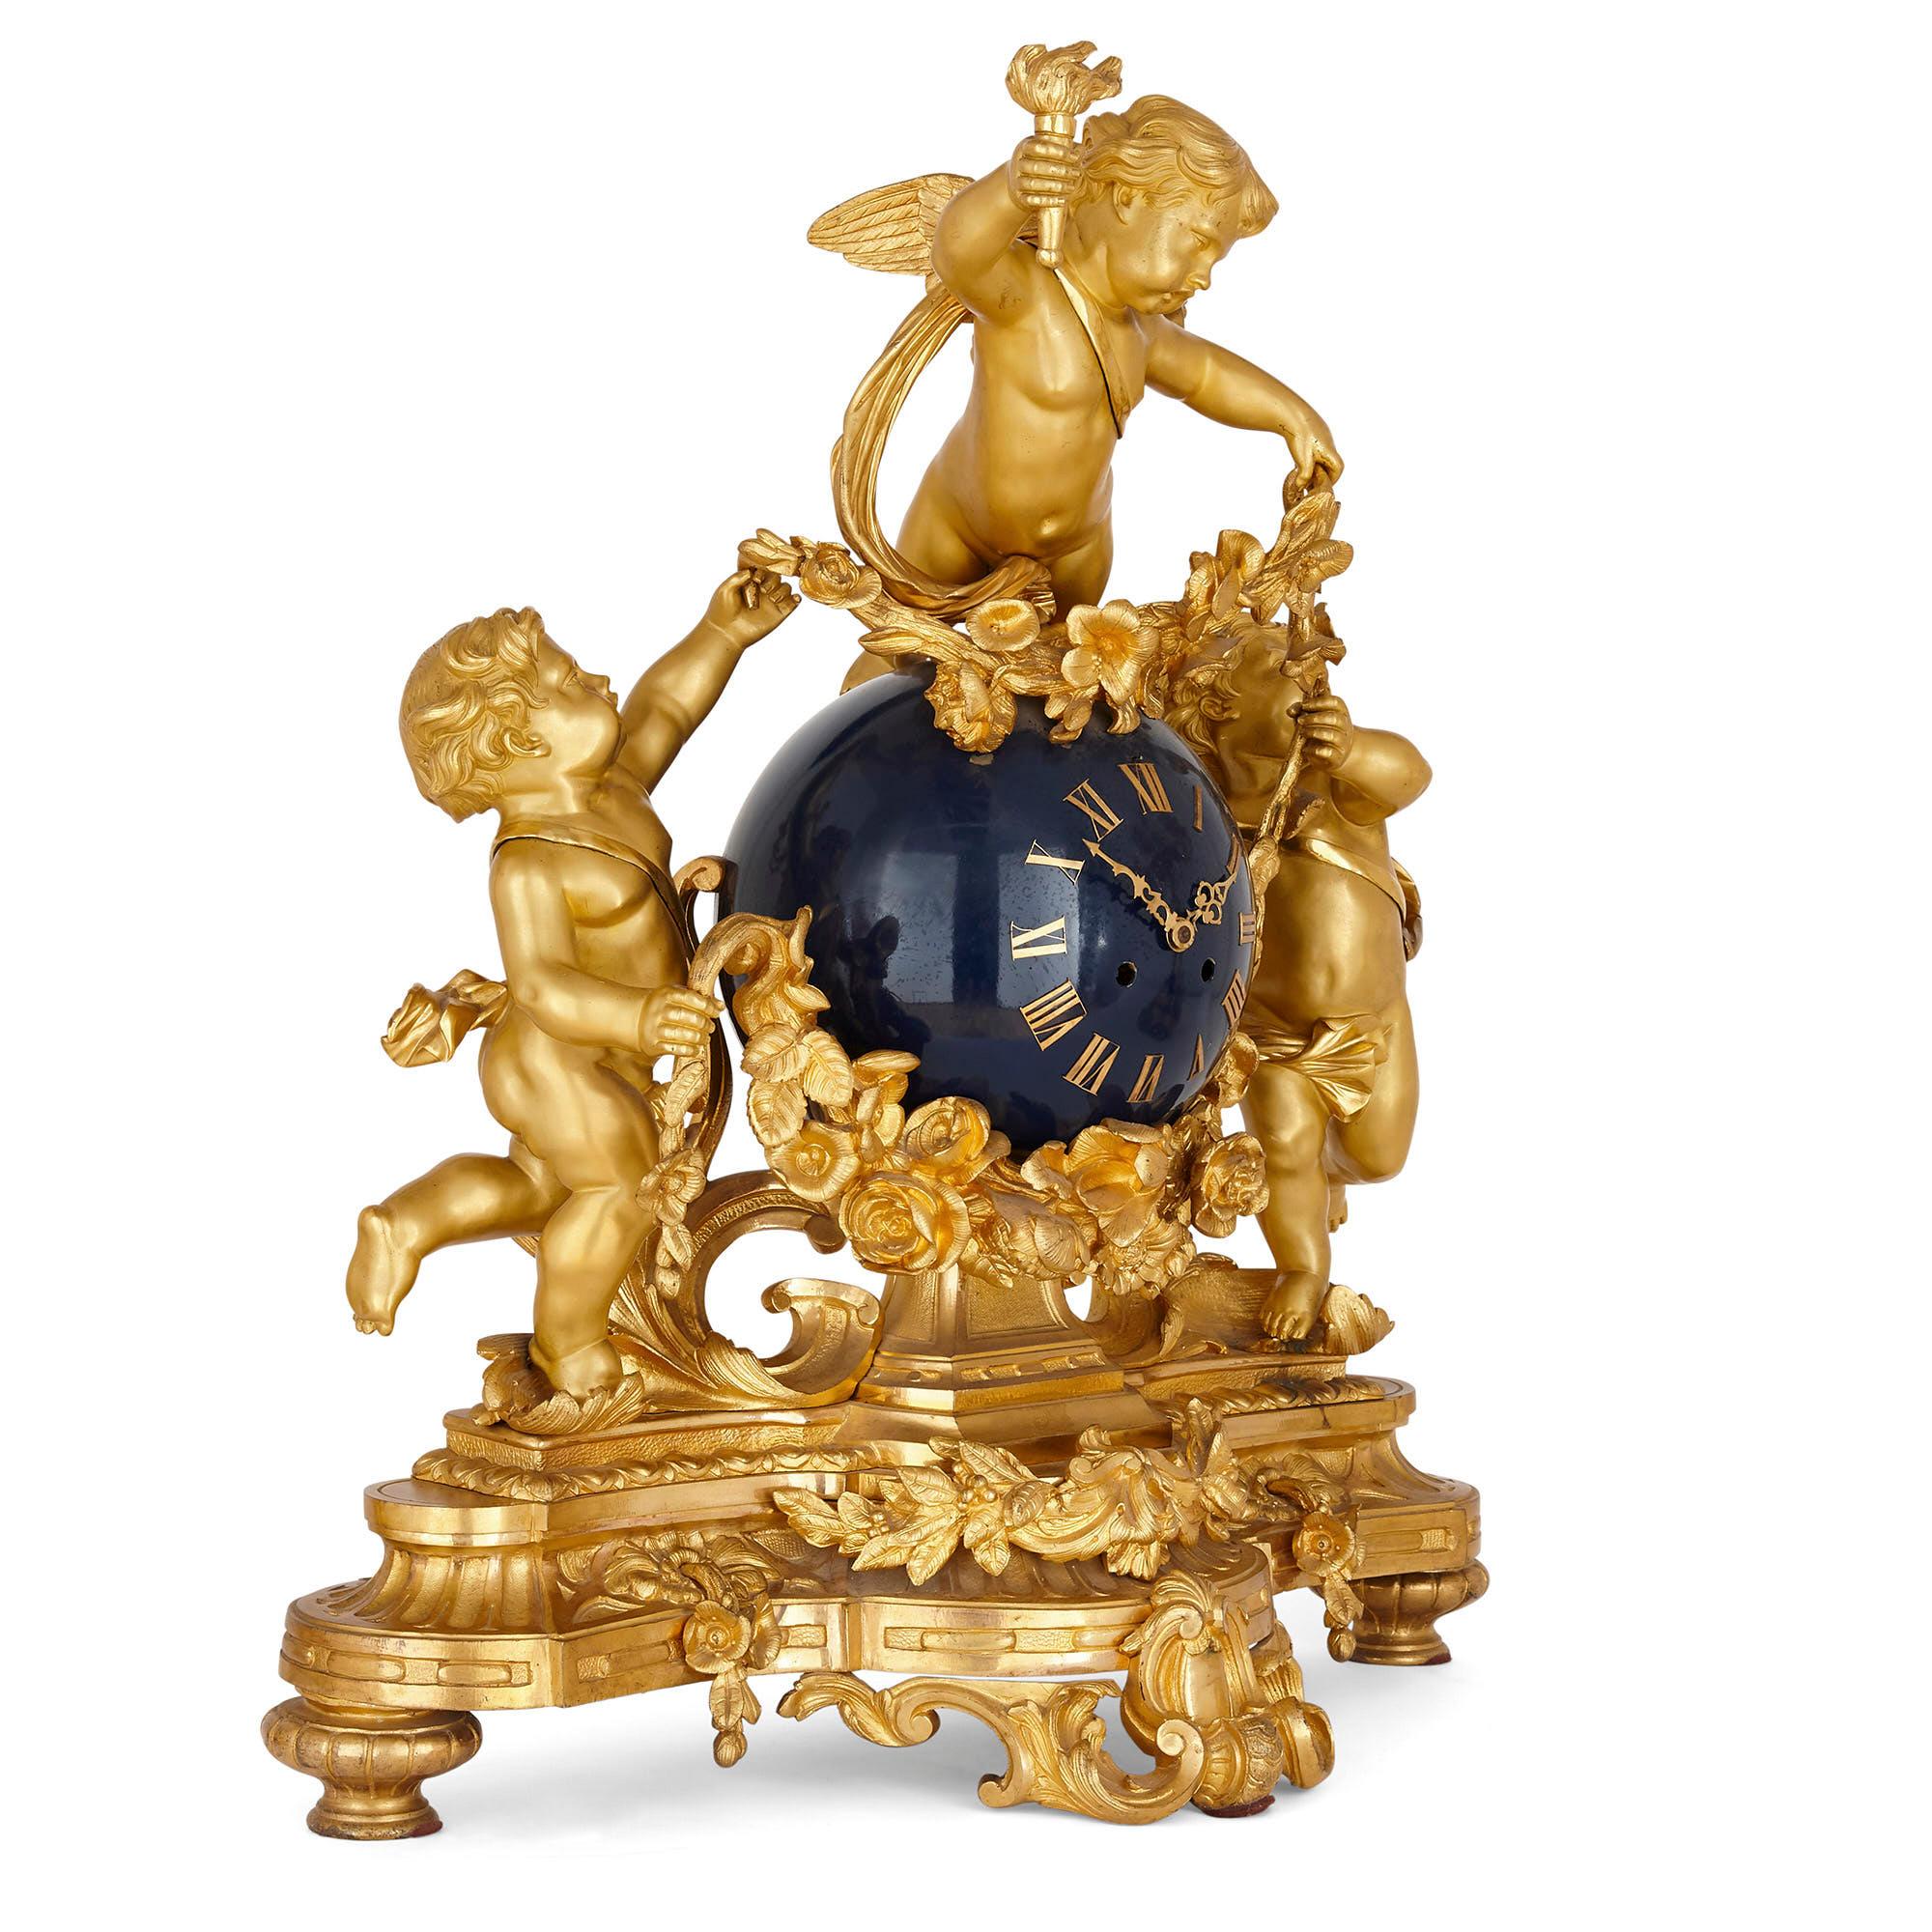 Large cherub-themed gilt bronze clock garniture by Popon
French, late 19th Century
Clock: Height 68cm, width 63cm, depth 26cm
Candelabra: Height 89cm, width 46cm, depth 39cm

This beautiful three-piece clock set is crafted from gilt bronze in